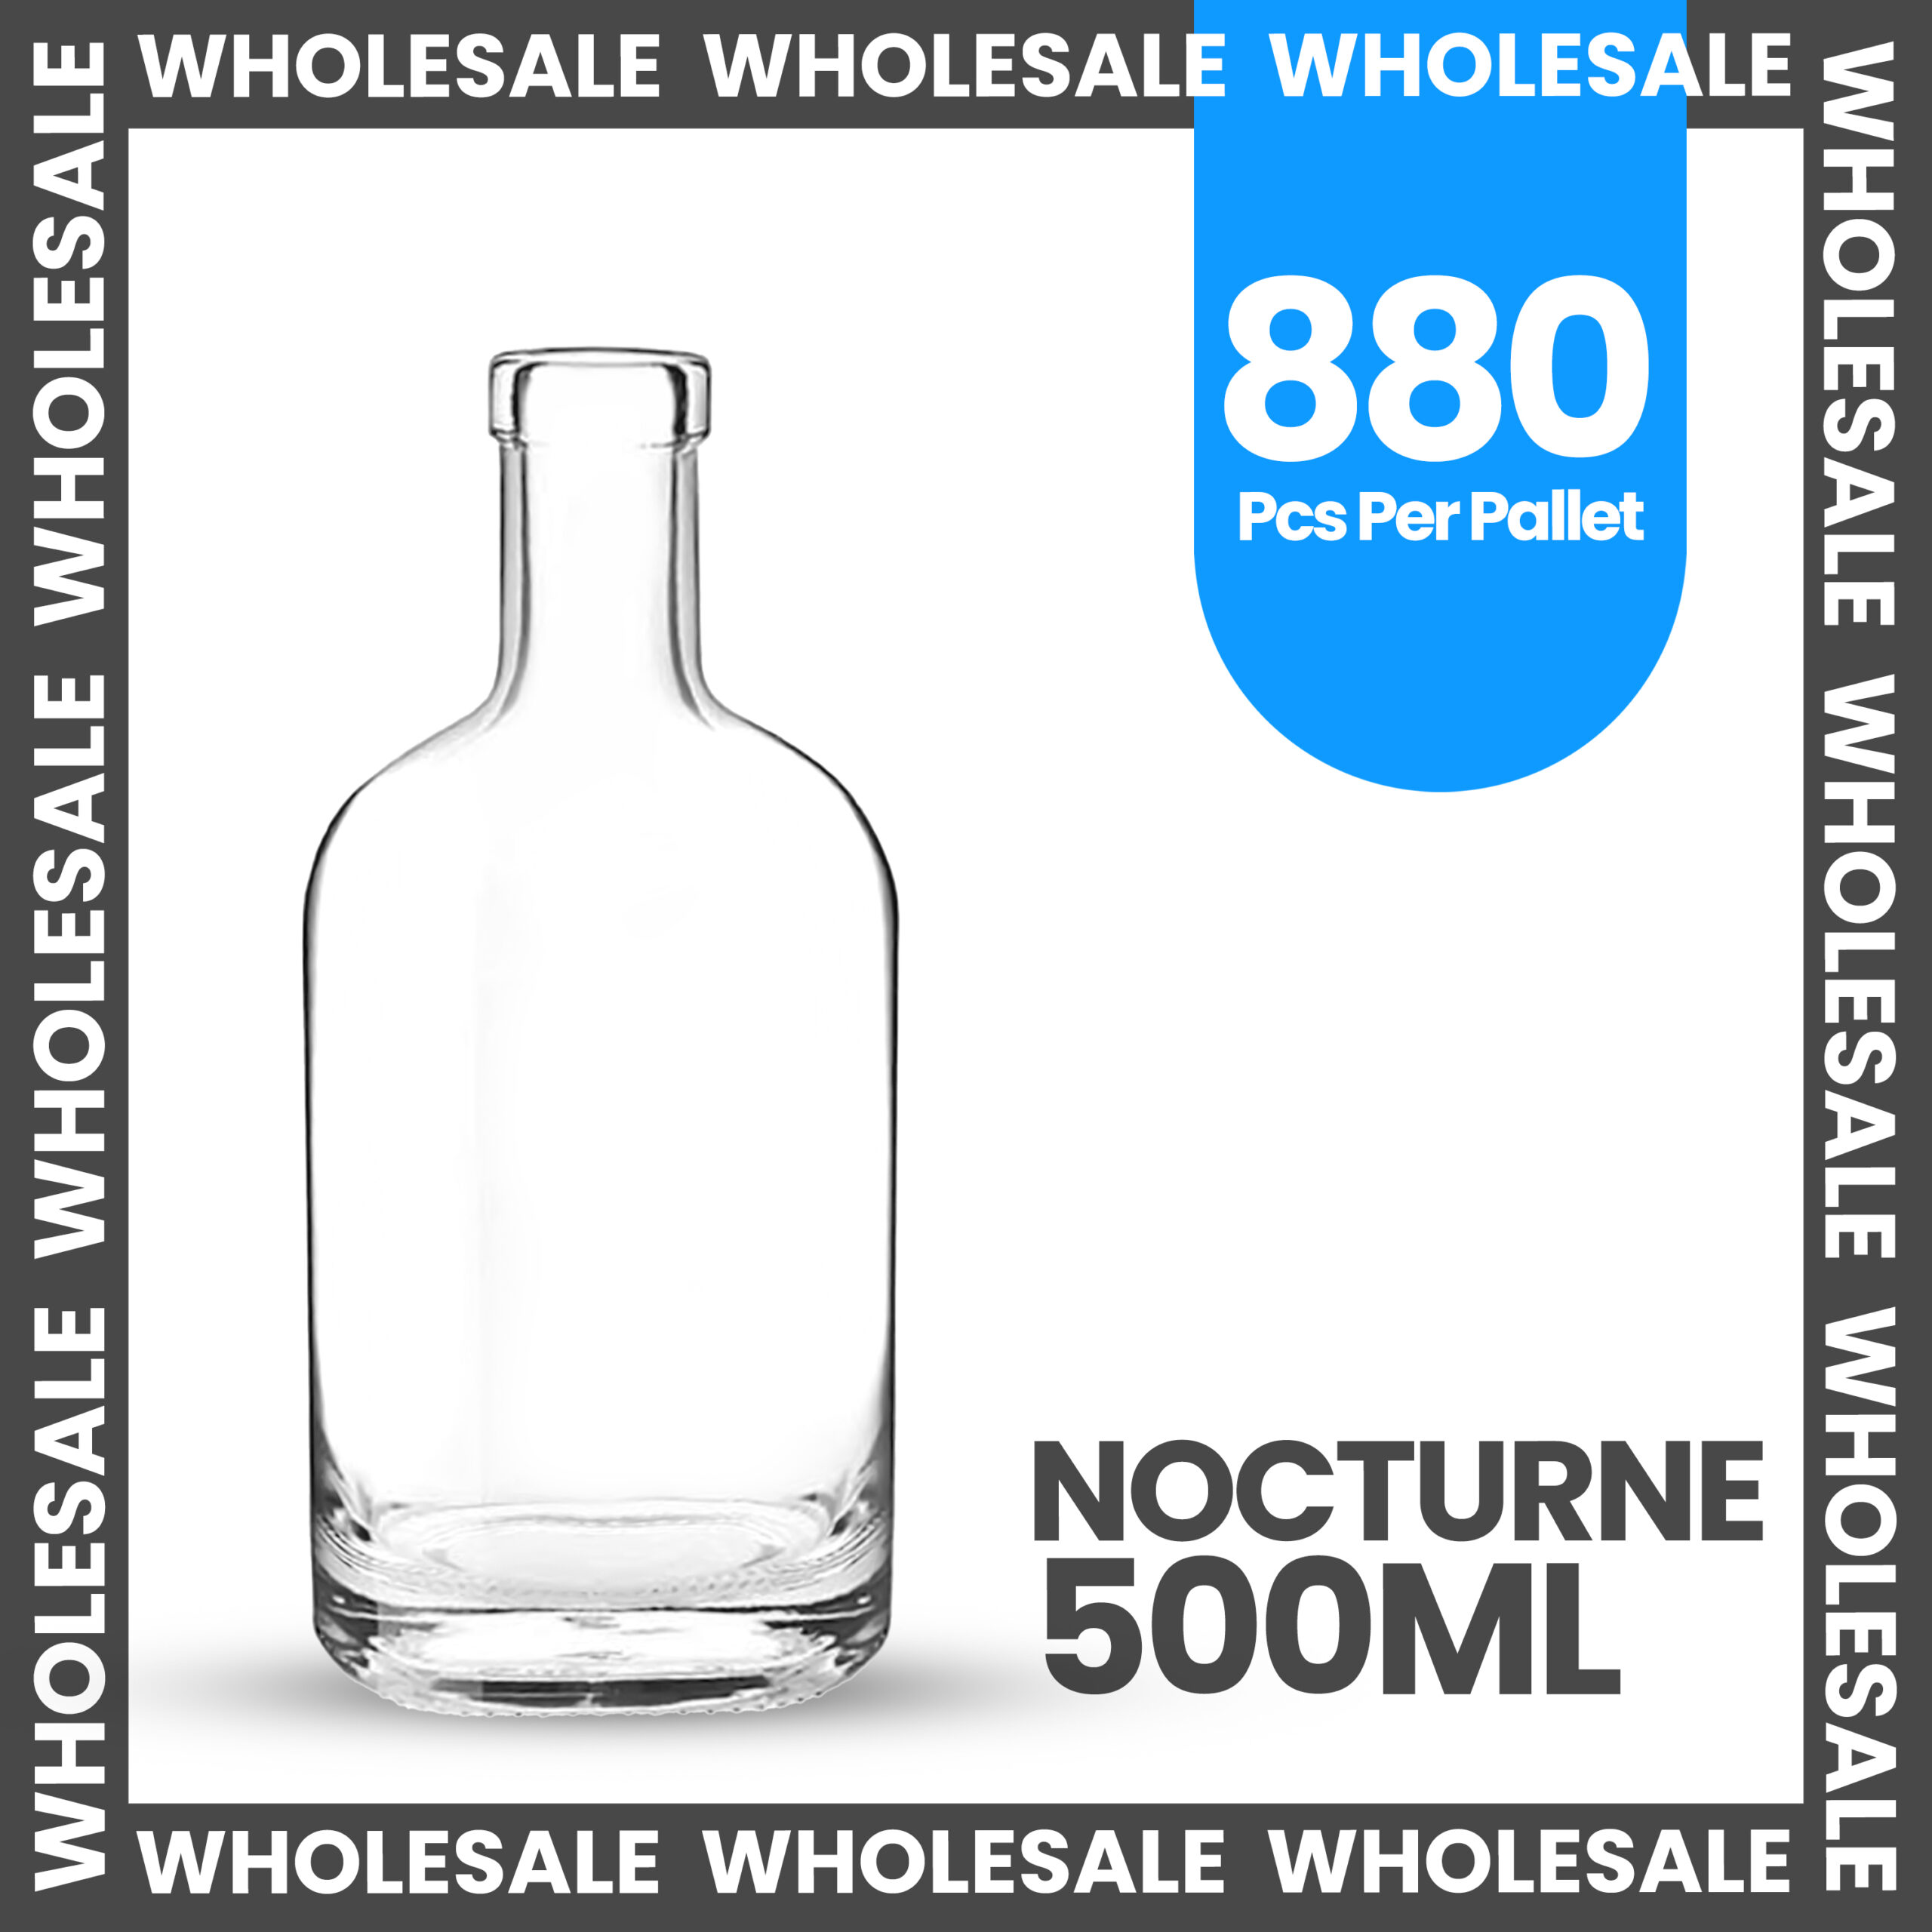 Wholesale repeated around image as a border. Picture of a bottle called Nocturne 500ml, 880 pcs per pallet